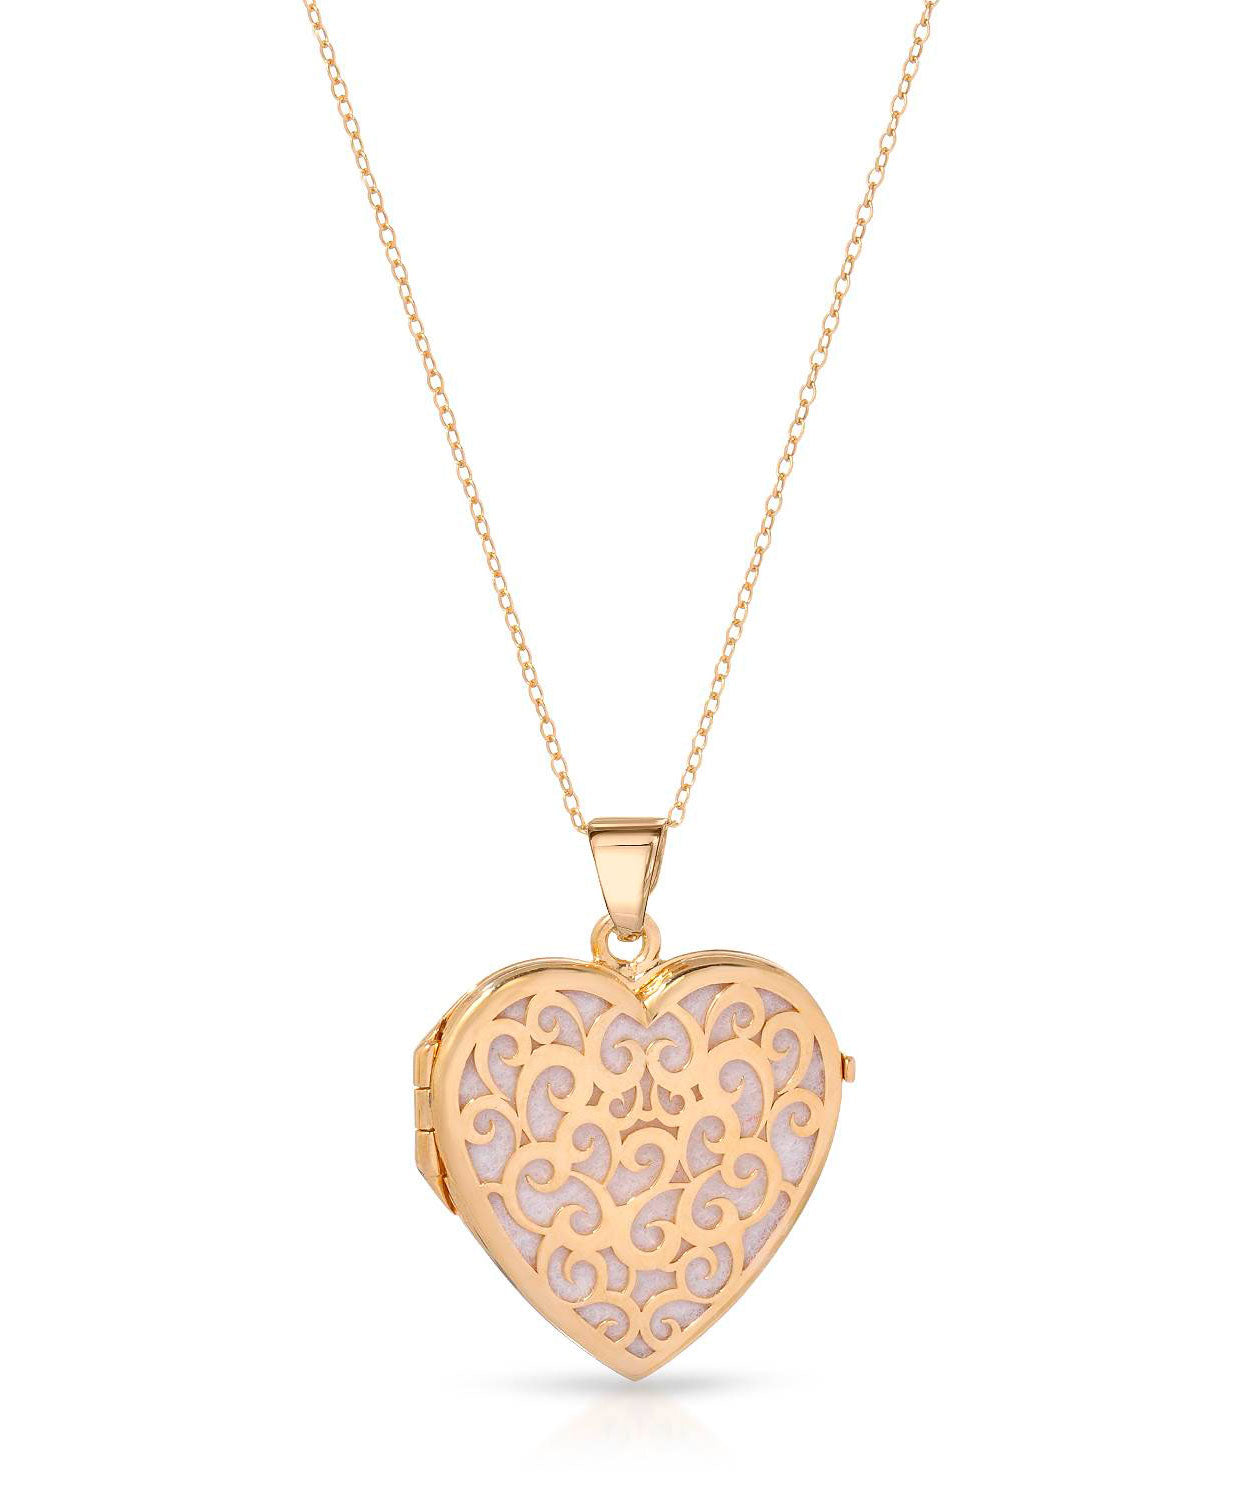 Patterns of Love Collection 14k Gold Plated 925 Sterling Silver Heart Locket Pendant With Chain - Made in Italy View 1